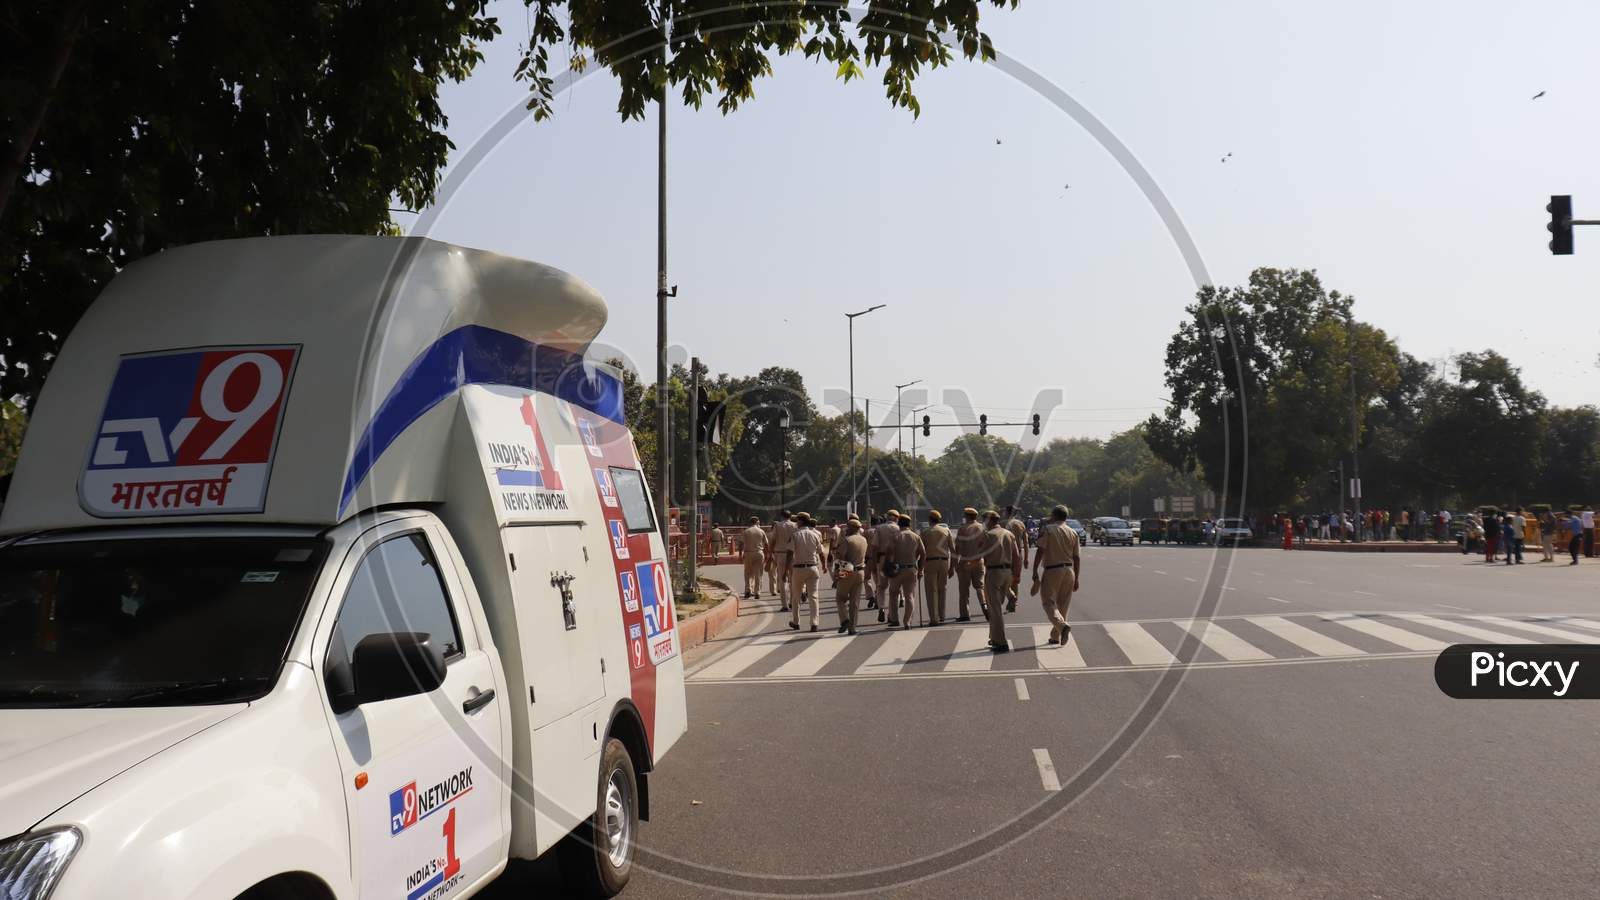 TV9 NETWORK VAN in front of india gate and police personal on 2nd oct 2020 Due to covid 19 no visitor. No traffic. Silent road.